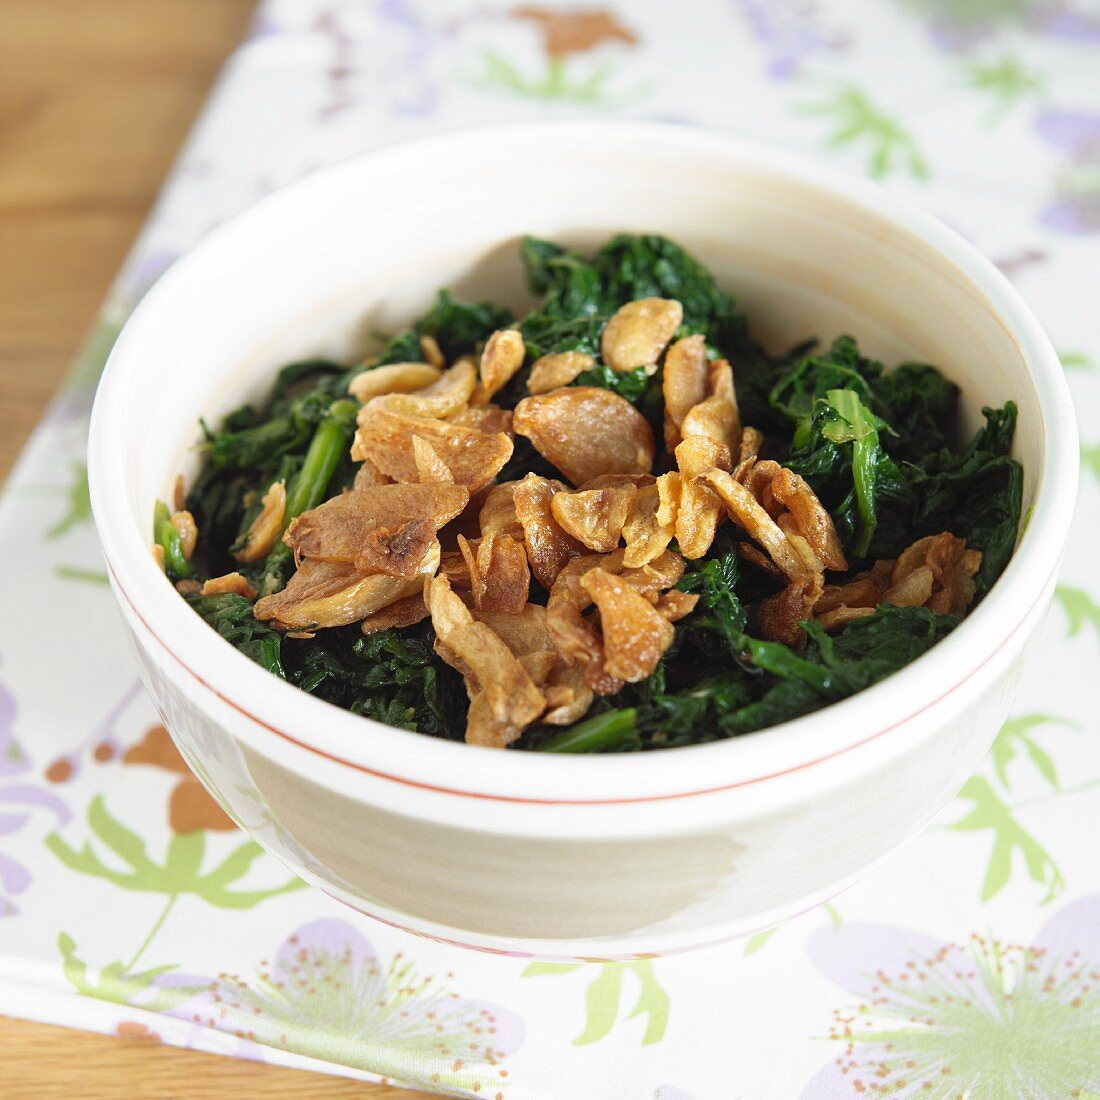 Bowl of Wilted Spinach with Roasted Garlic